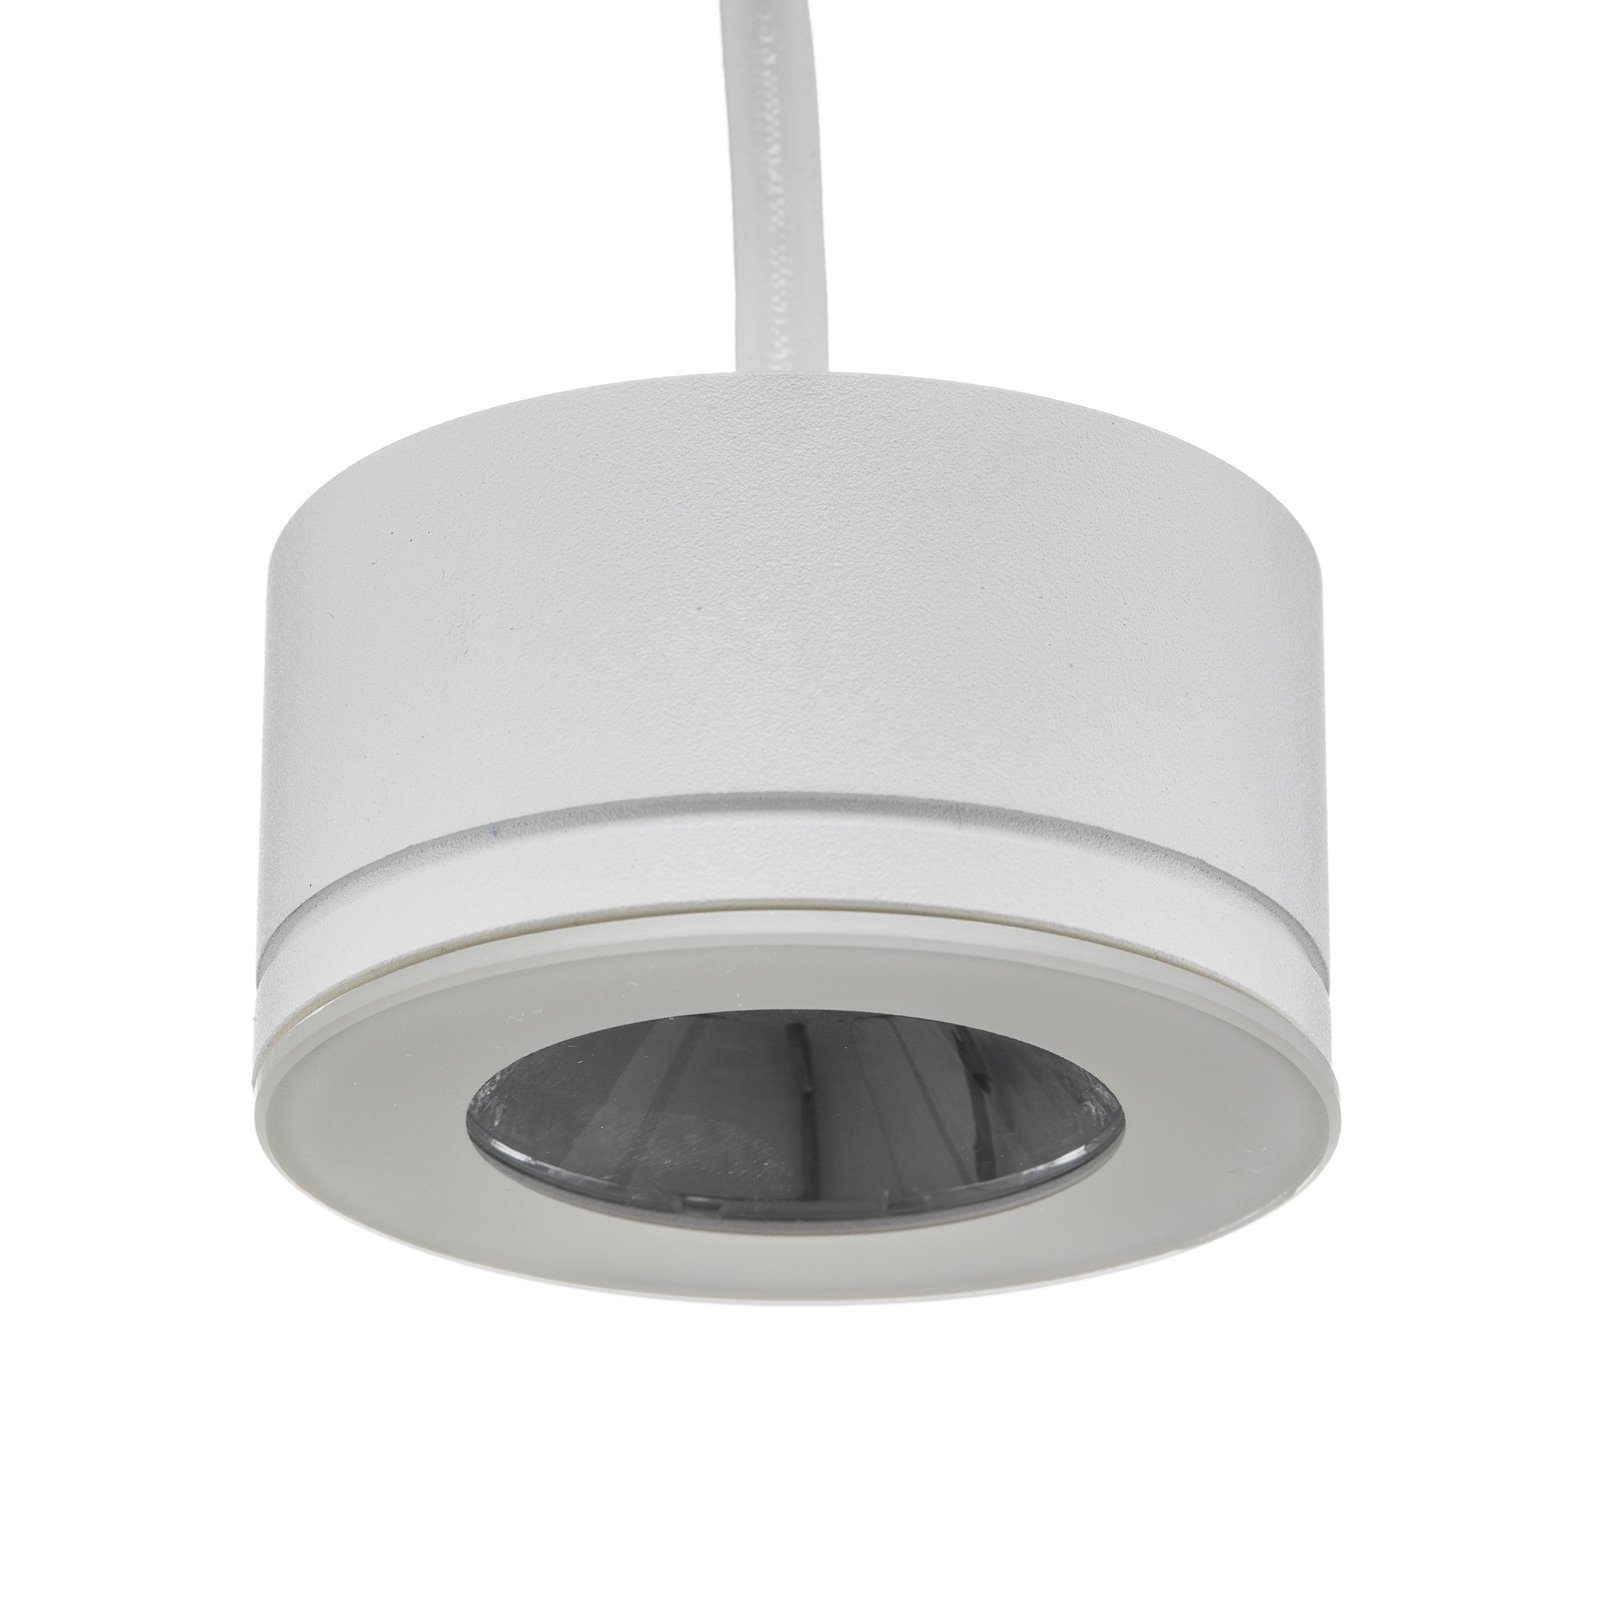 Newton 35 LED ceiling spotlight for indoor and out